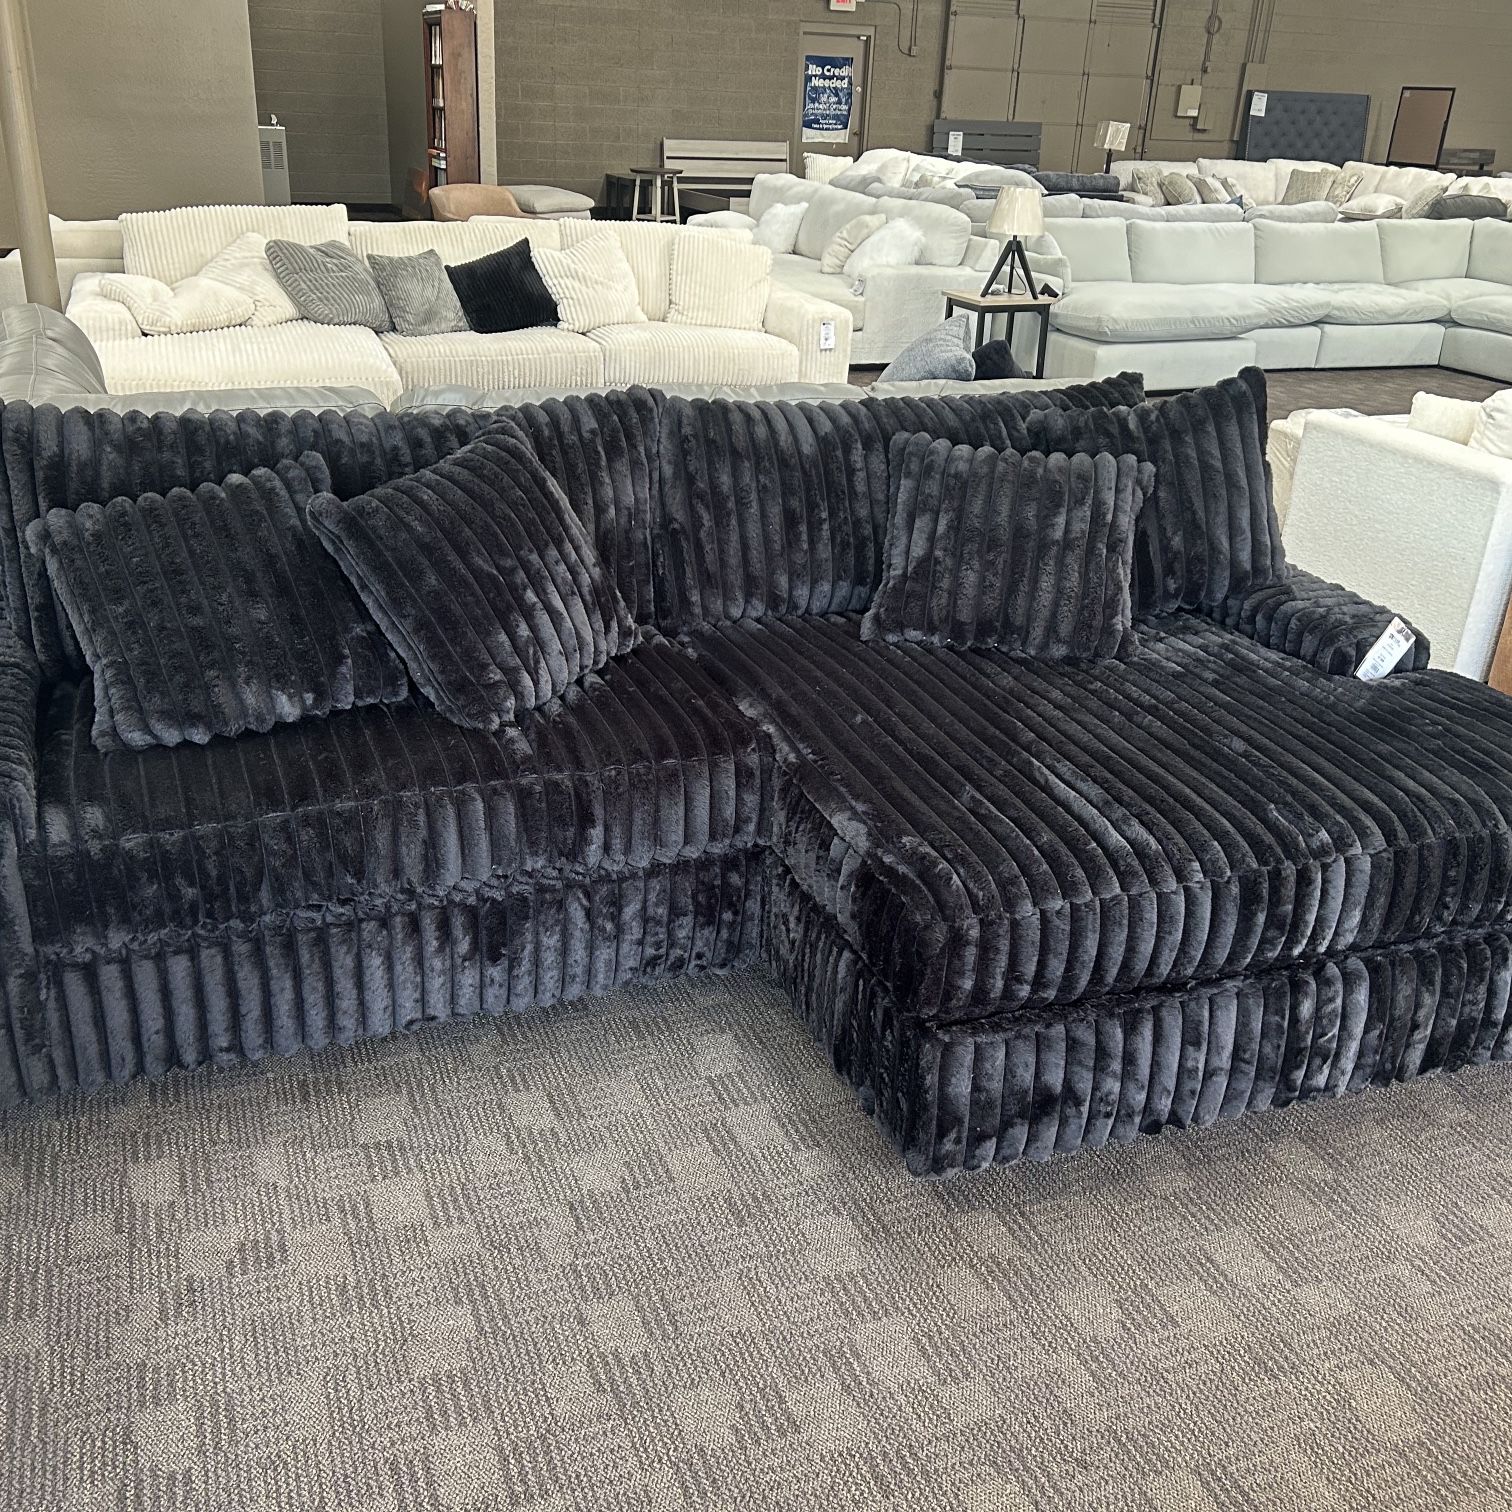 Big Soft Black Sectional Couch